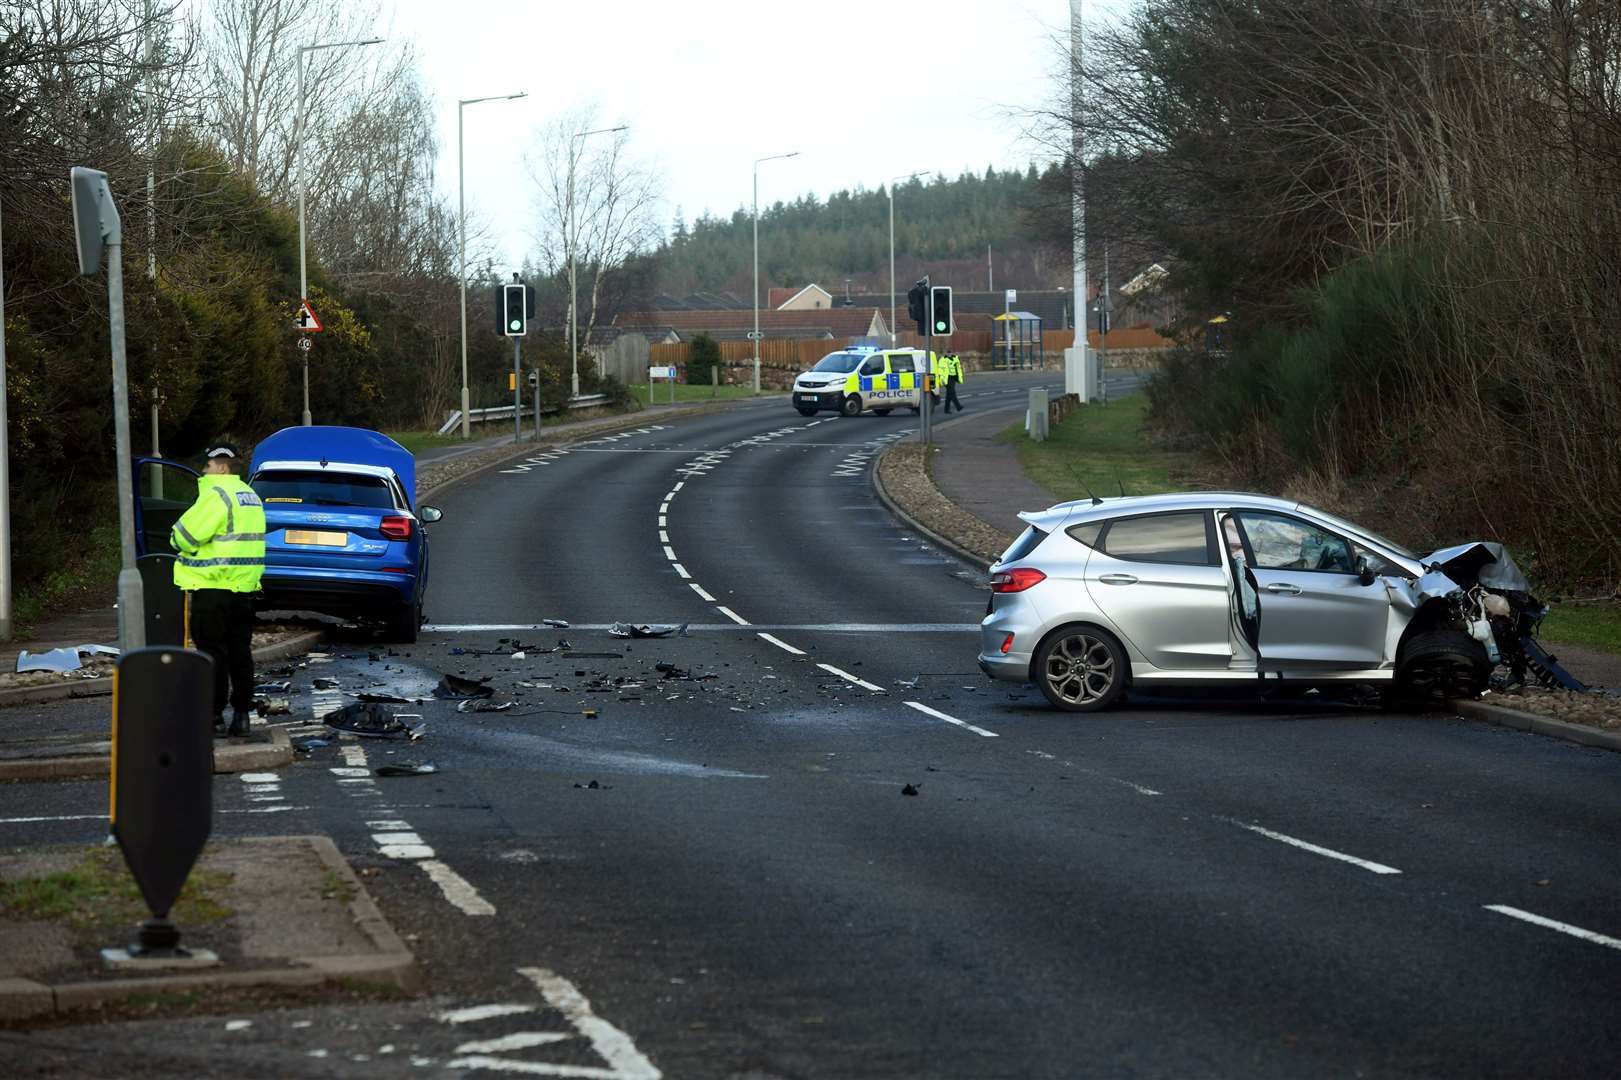 The scene at Sunday's crash that injured four people.